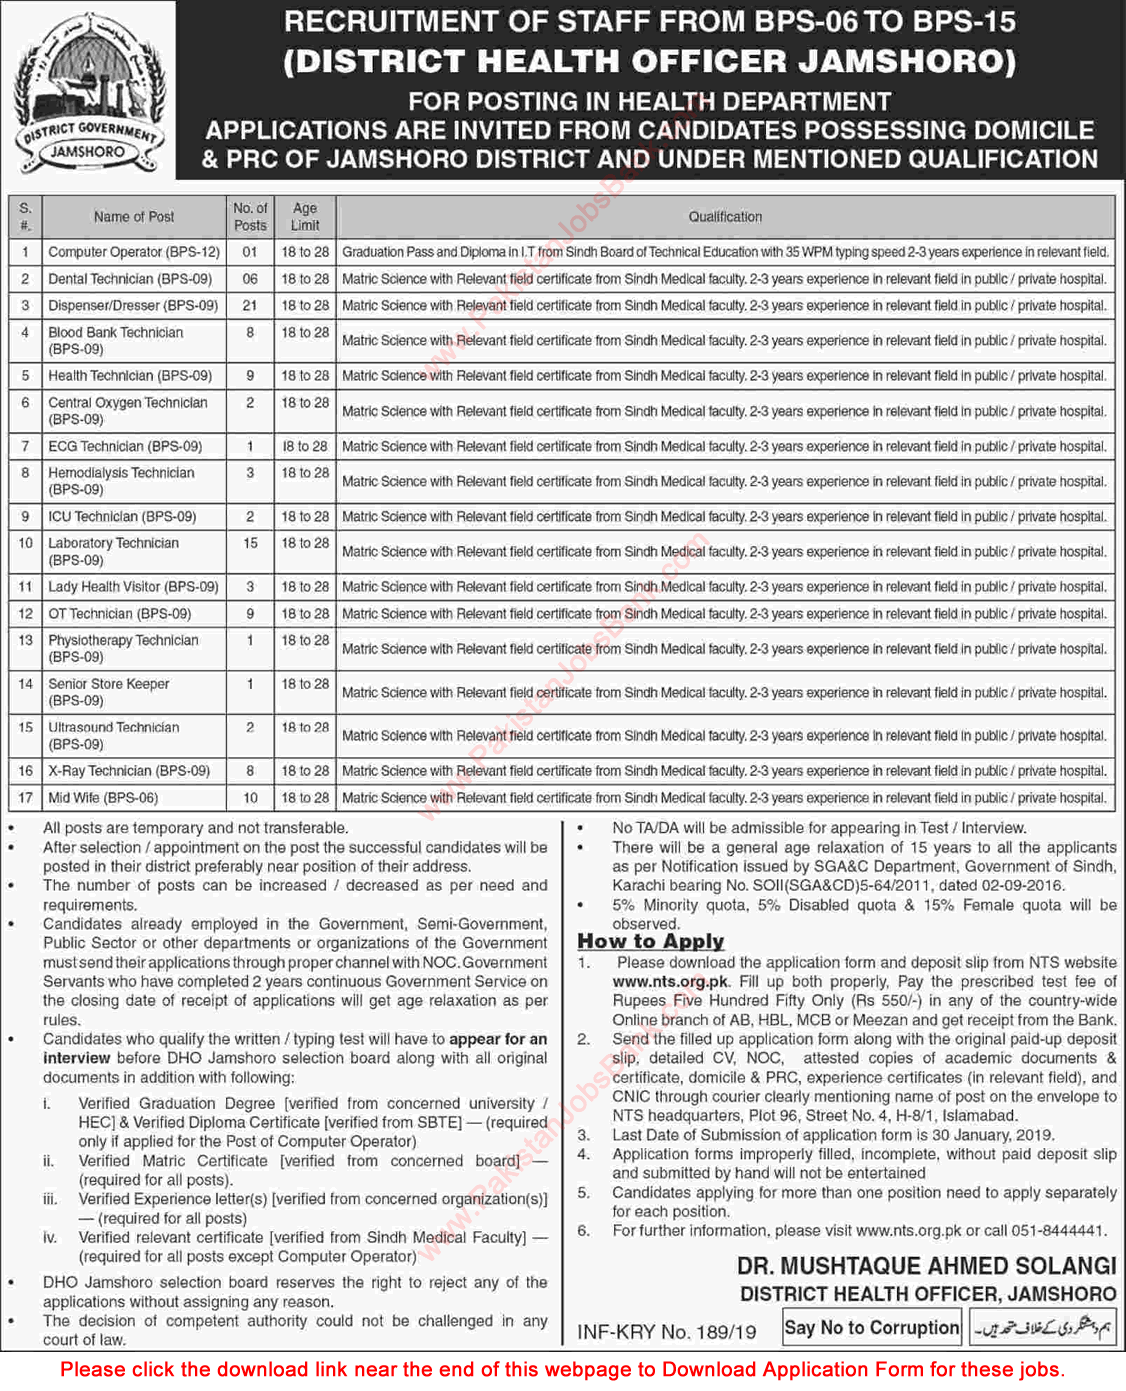 Health Department Jamshoro Jobs 2019 NTS Application Form Dispensers / Dressers, Lab Technicians & Others Latest